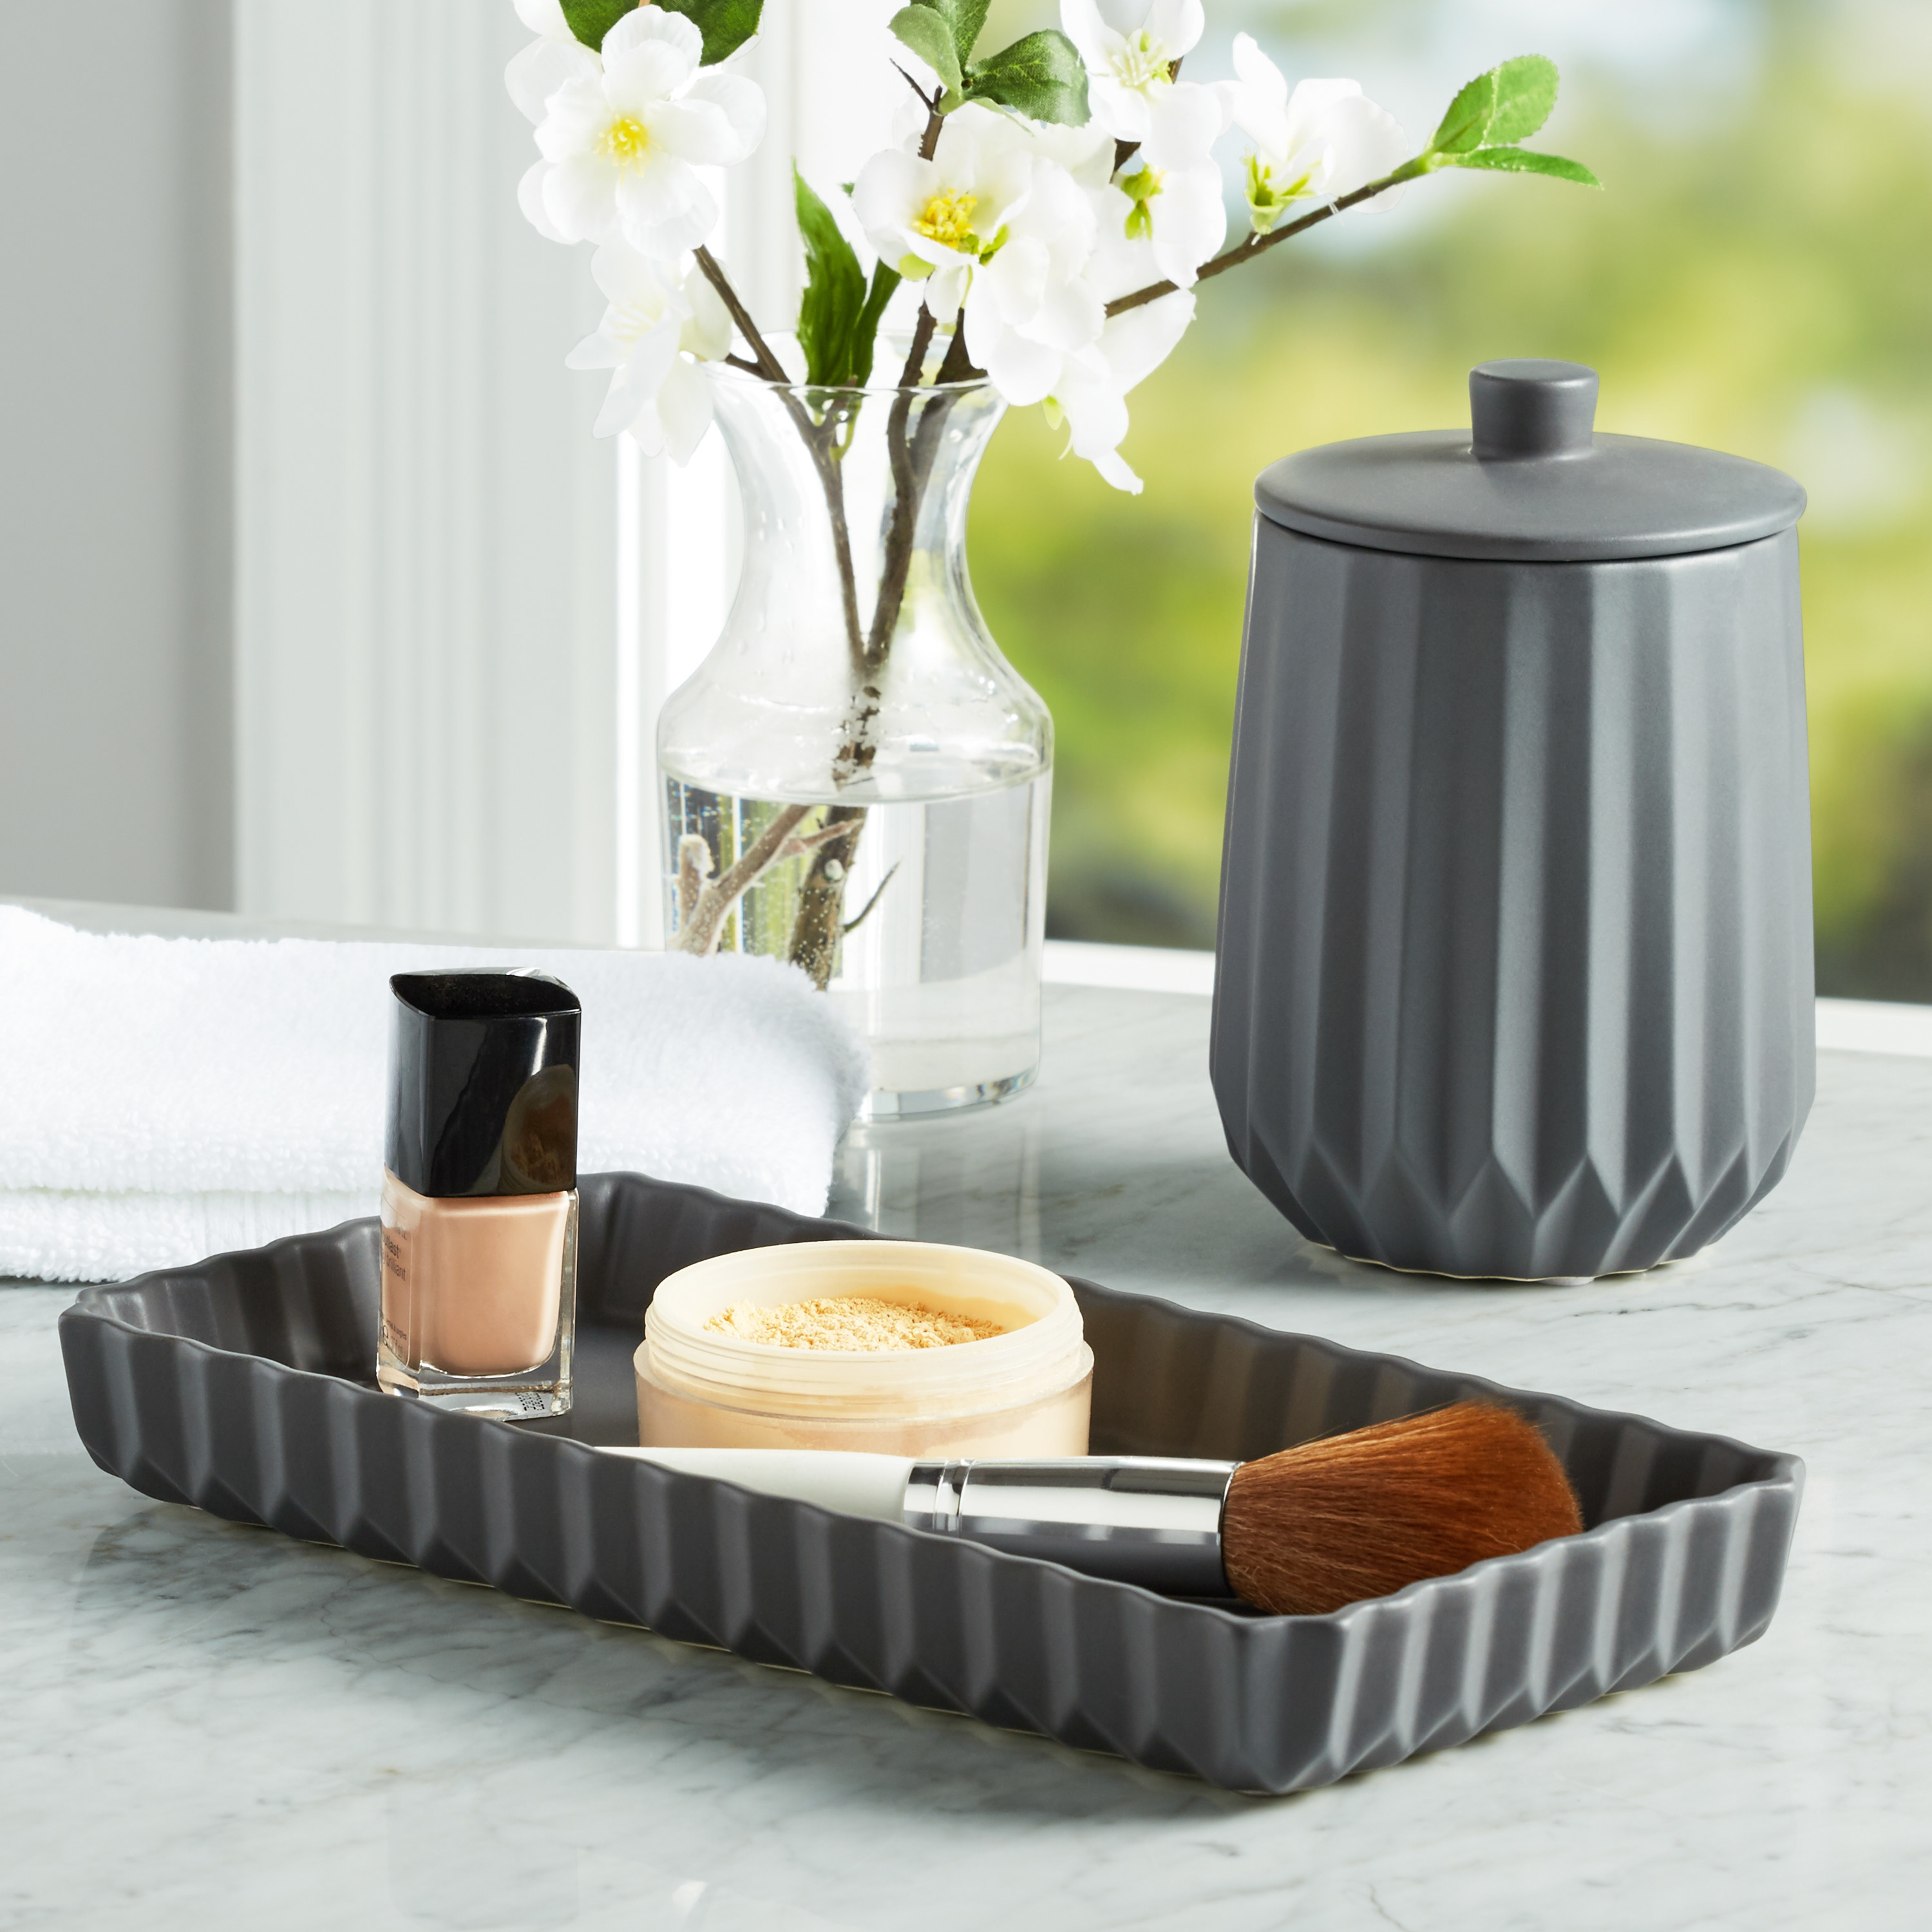 A grey tray holding cosmetics and a great jar with lid